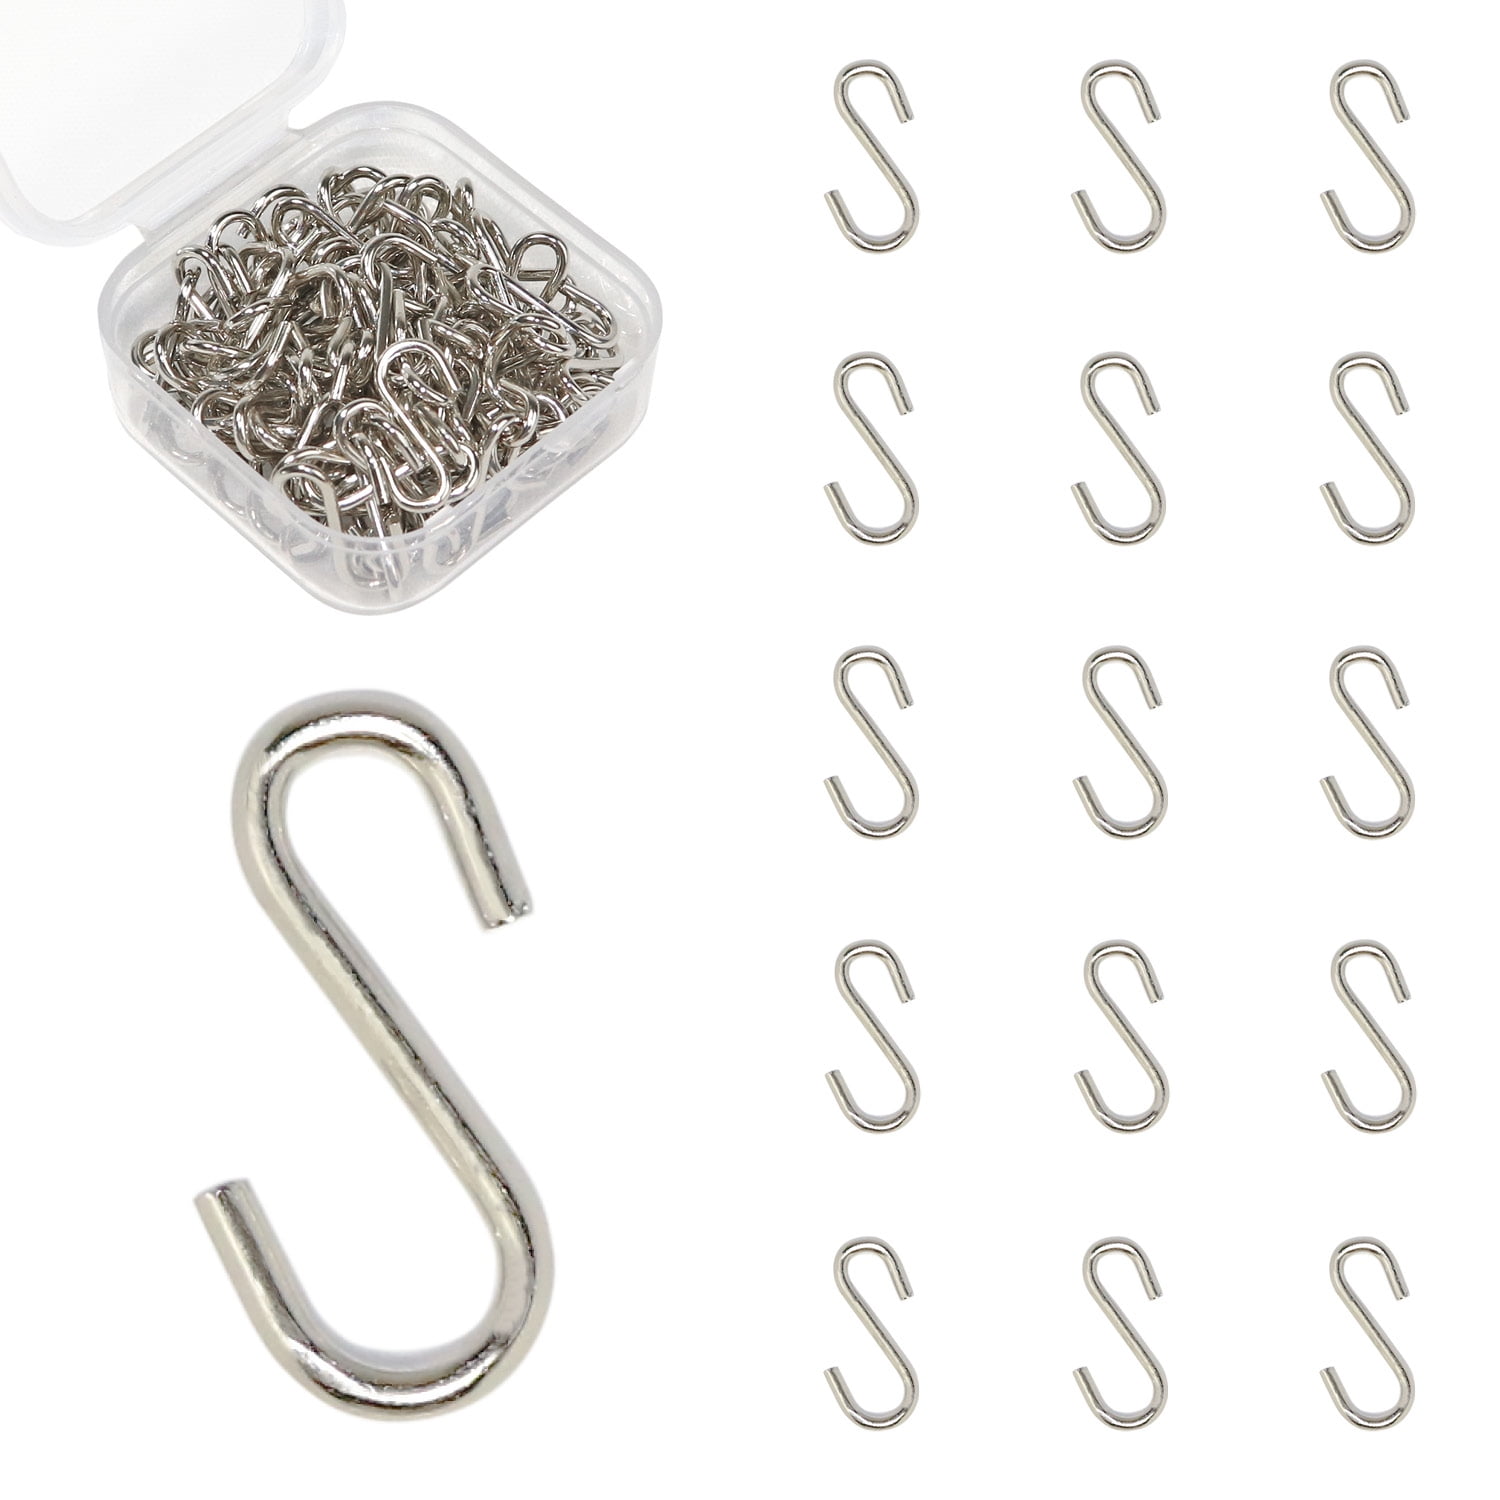 2.0 x 24 mm Tags Hanging Jewellery Keyrings Toyvian Mini S Hook Connectors 100 Pieces Metal S-Shaped Kitchen Bedroom Hooks for DIY Crafts 